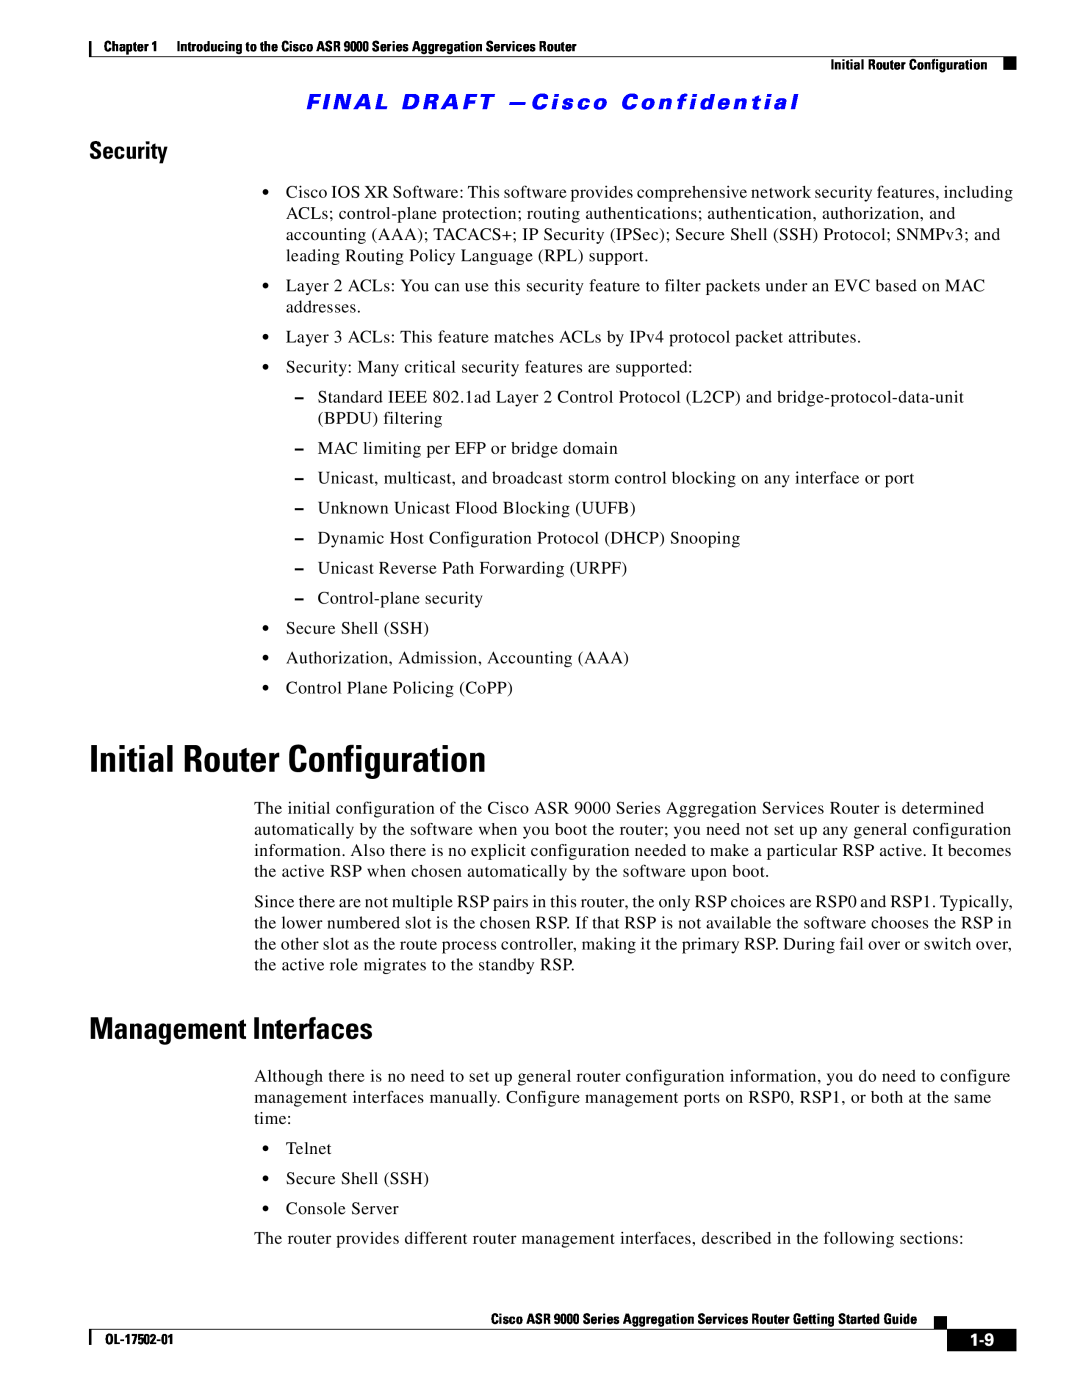 Cisco Systems A9KMOD80TR, ASR 9000, A9K24X10GETR manual Initial Router Configuration, Management Interfaces, Security 